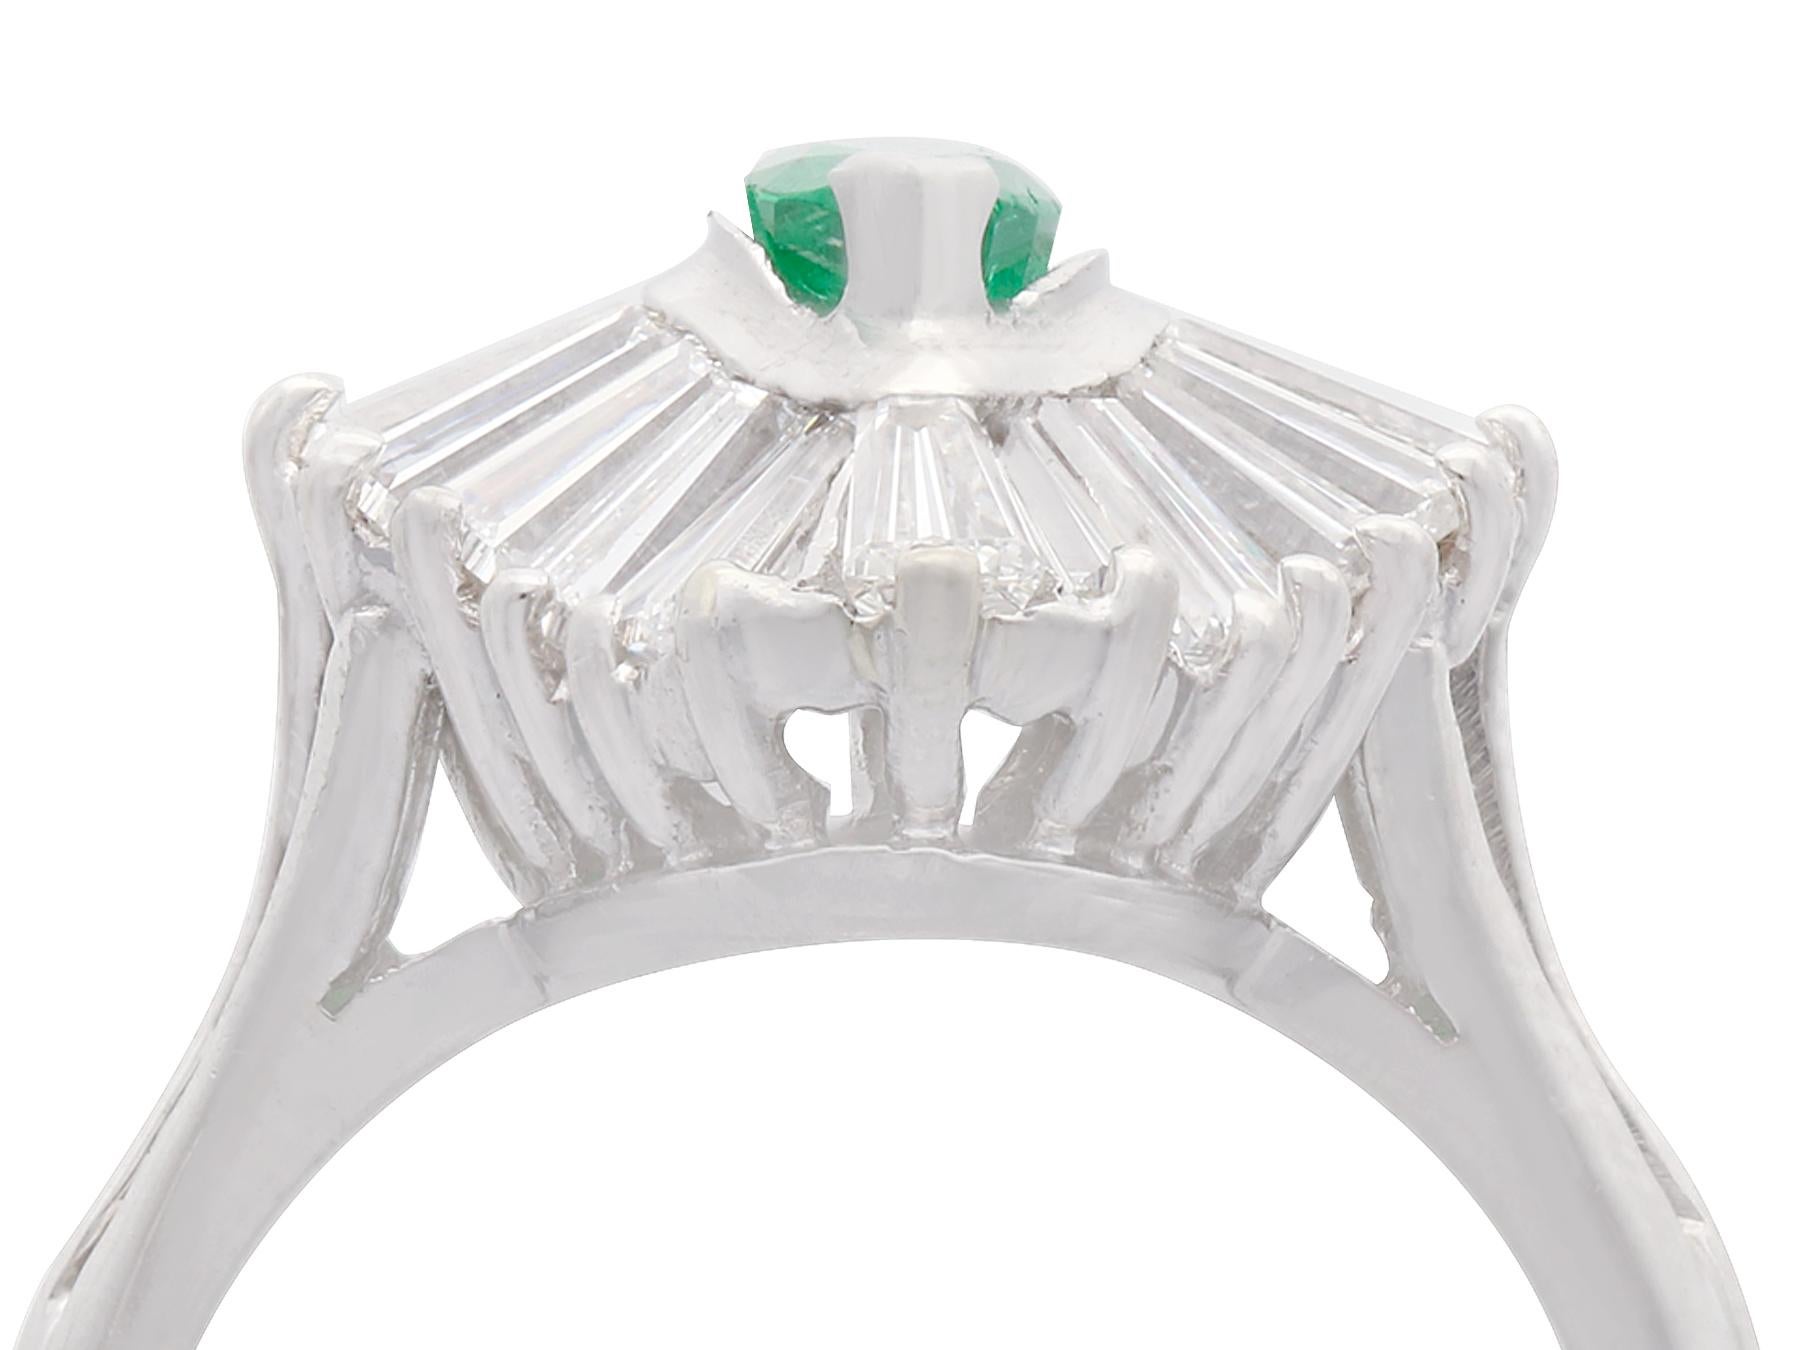 An impressive vintage 1970s 0.60 carat emerald and 1.85 carat diamond, platinum marquise shaped dress ring; part of our diverse gemstone jewelry collections

This fine and impressive marquise emerald and diamond ring has been crafted in